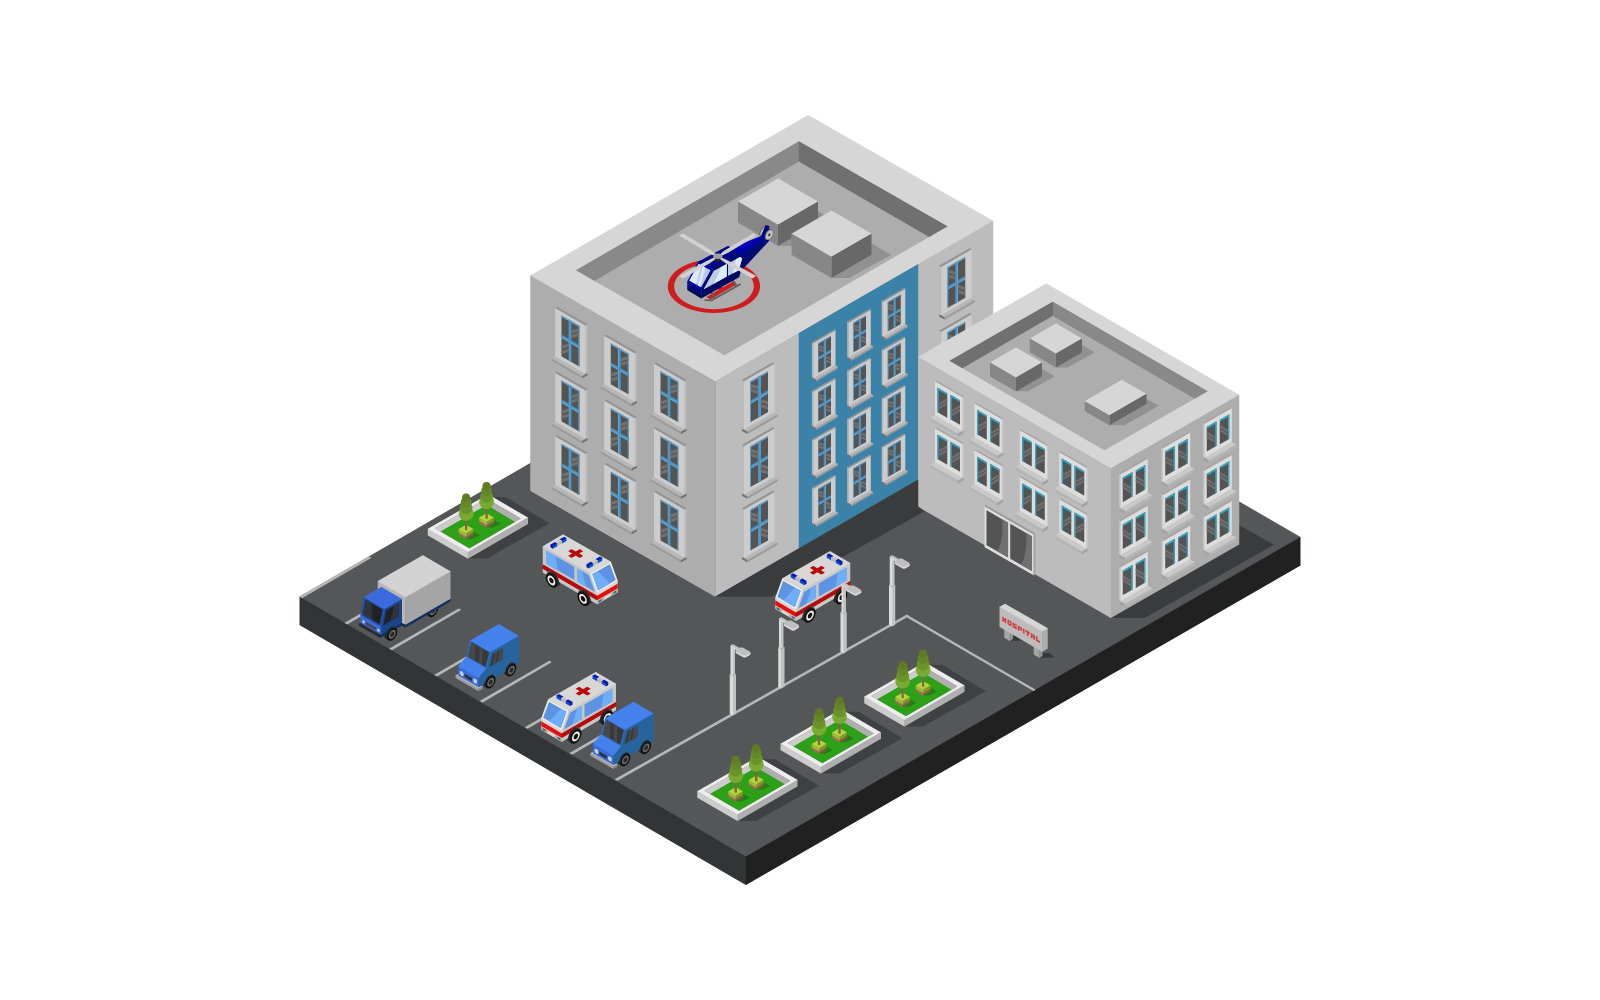 Hospital illustrated in vector on a background